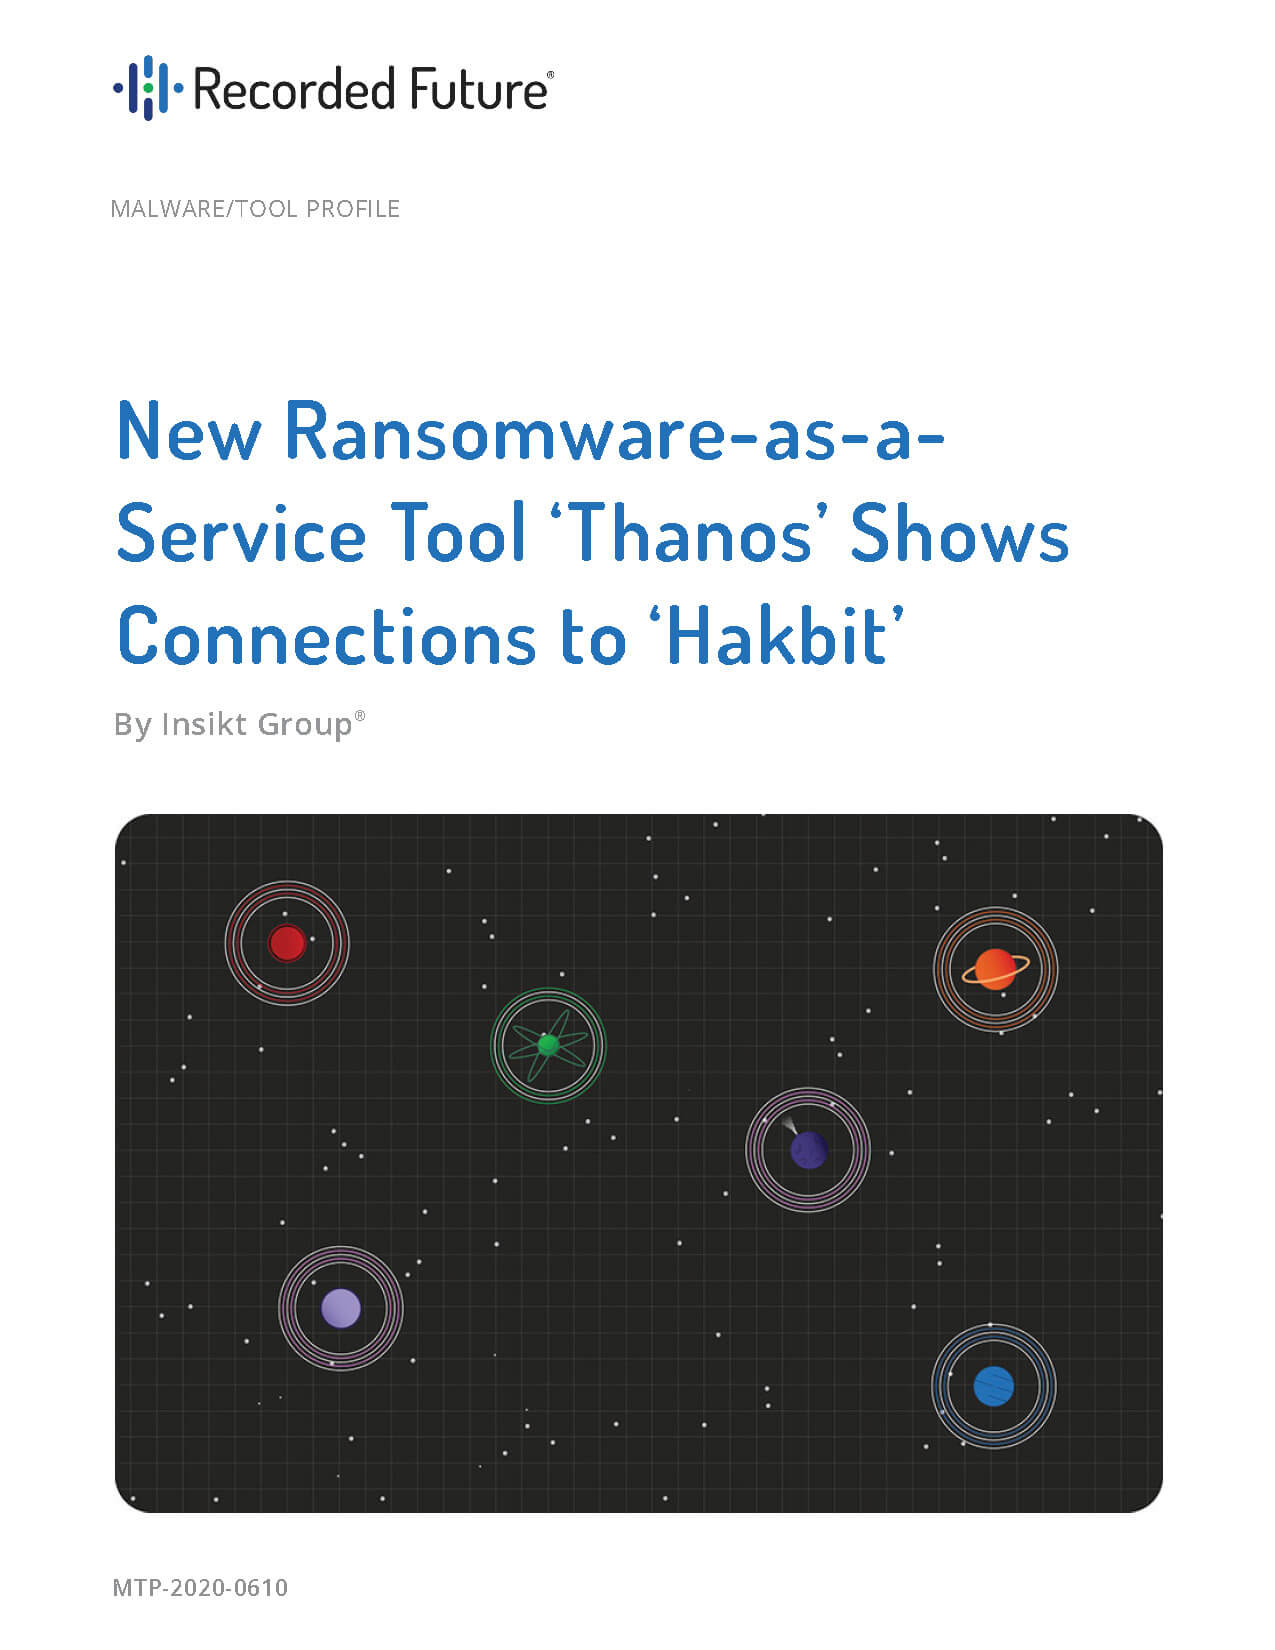 New Ransomware-as-a-Service Tool ‘Thanos’ Shows Connections to ‘Hakbit’ Report